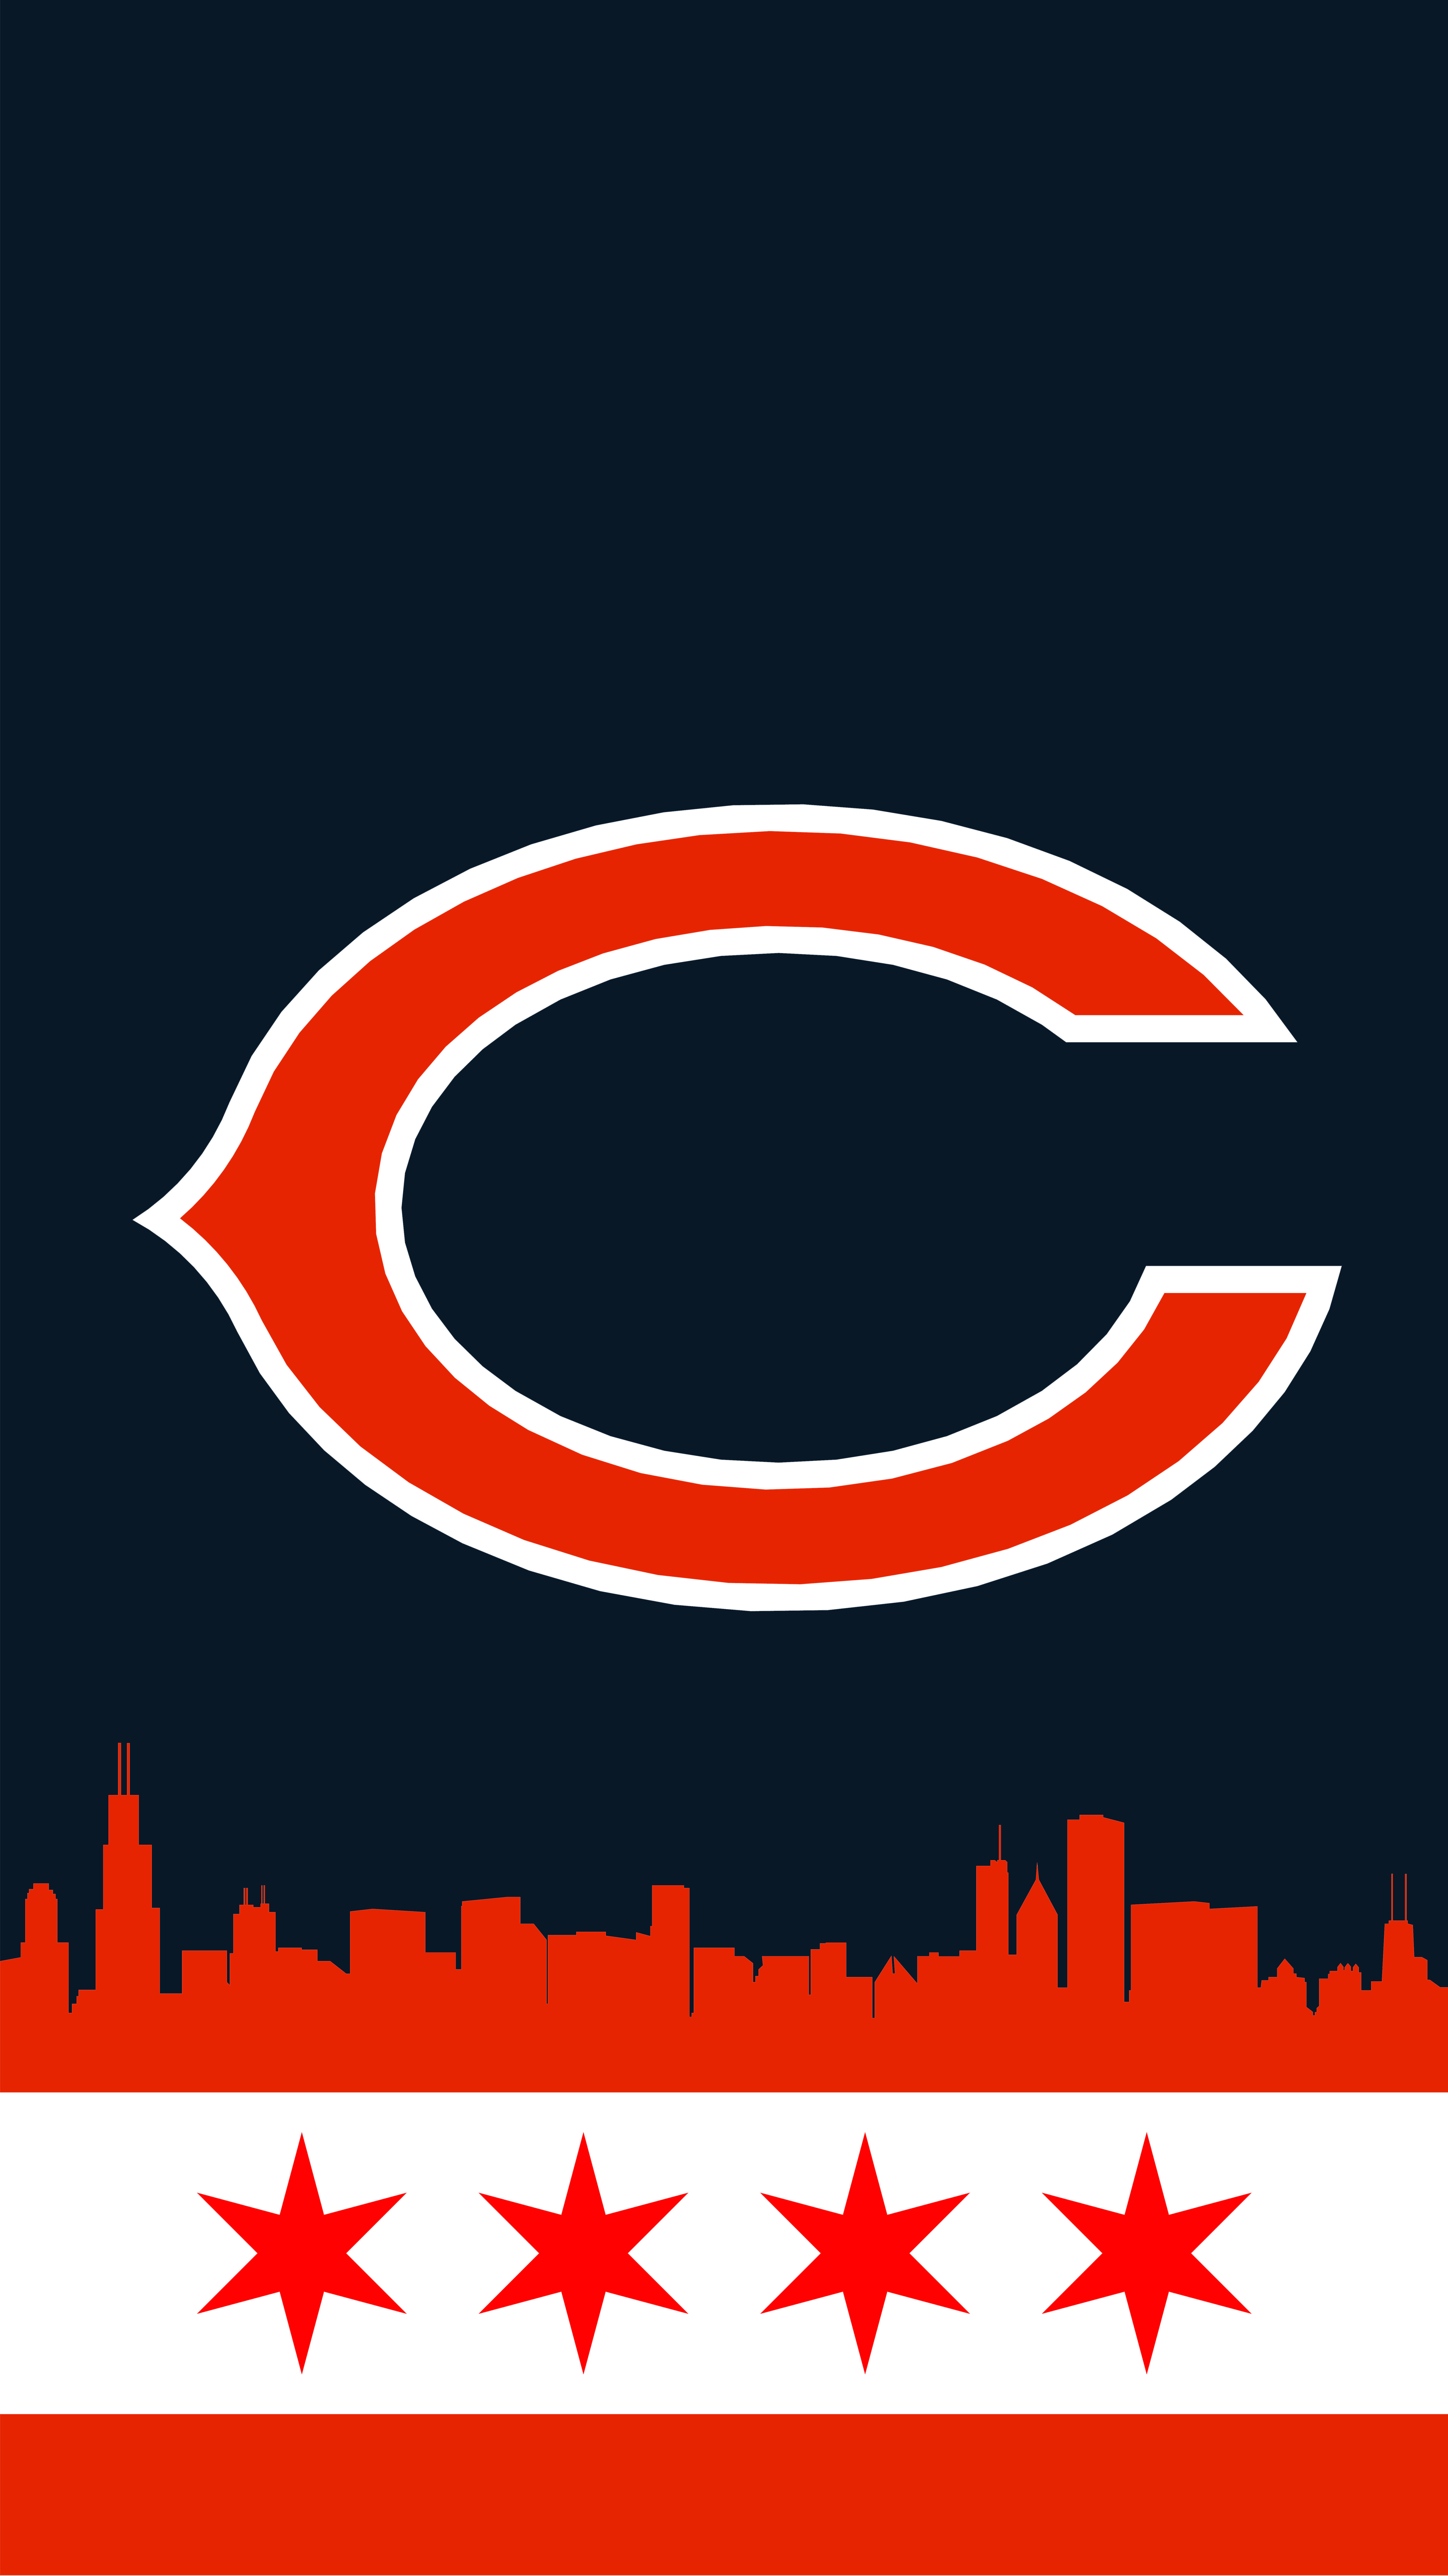 the bears are my new team so i made this iphone wallpaper.thought